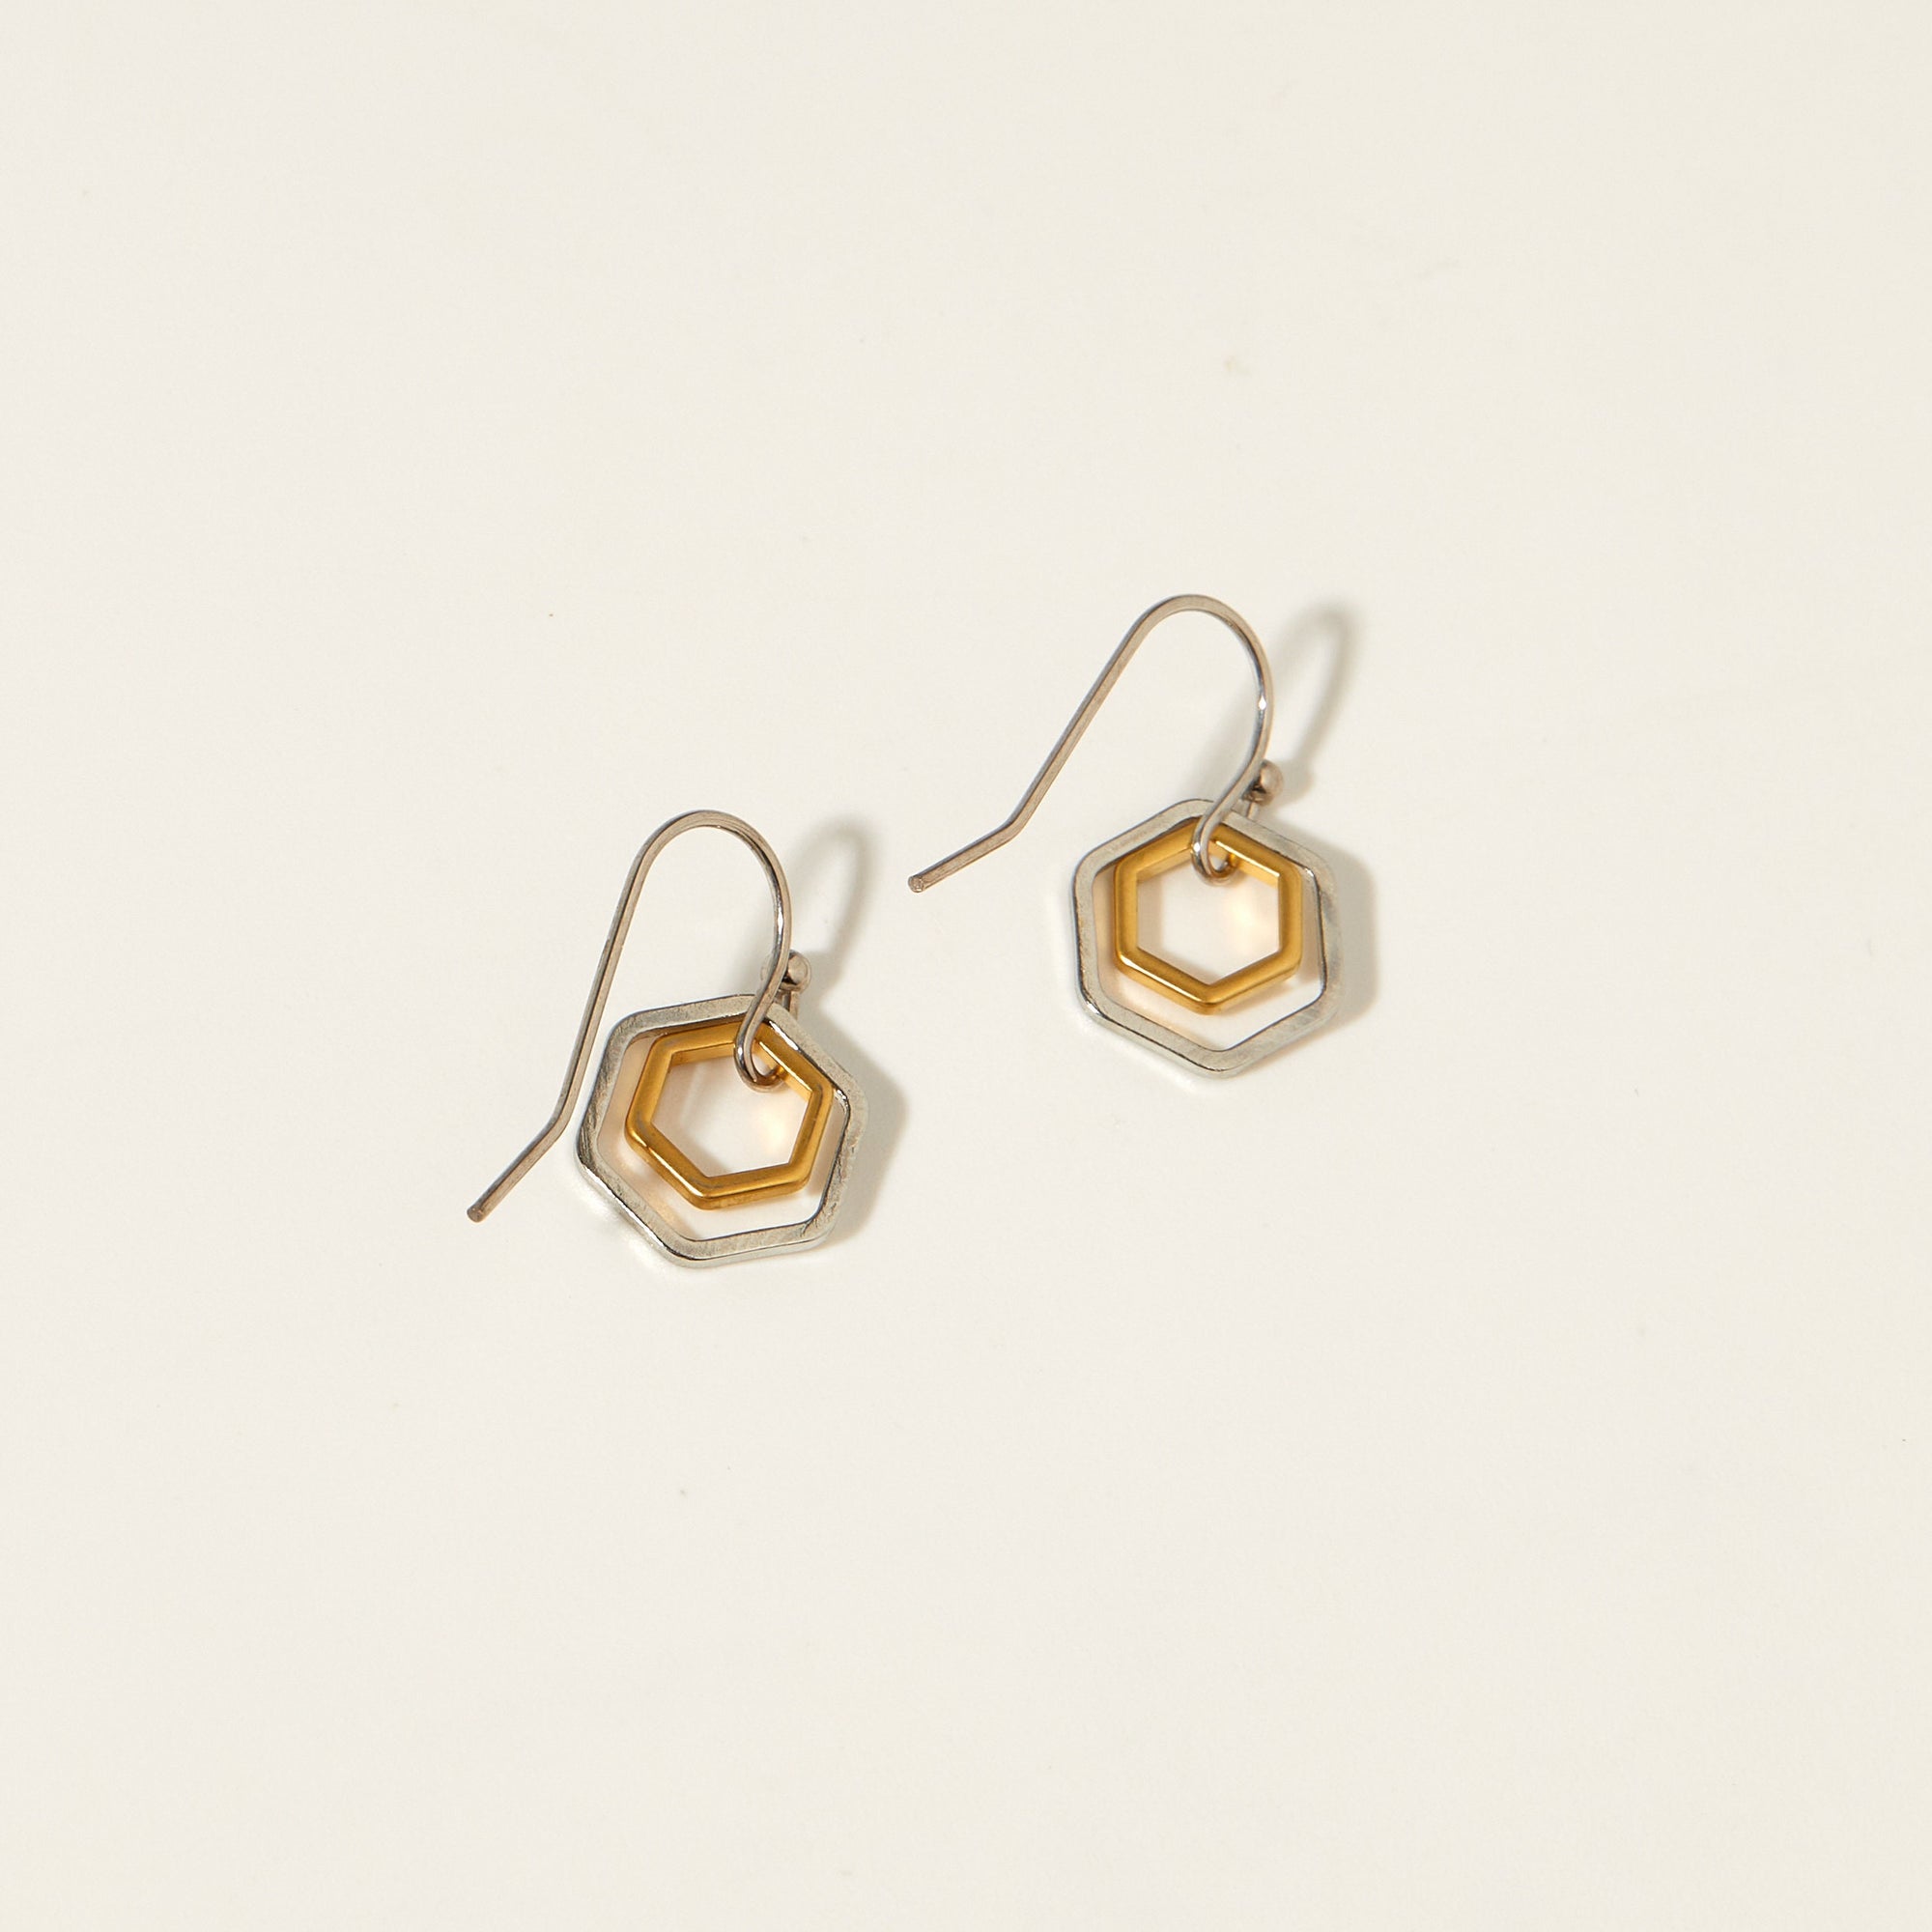 "Le Contour" Silver and Matte Gold Tiny Hoop Mixed Metal Earrings